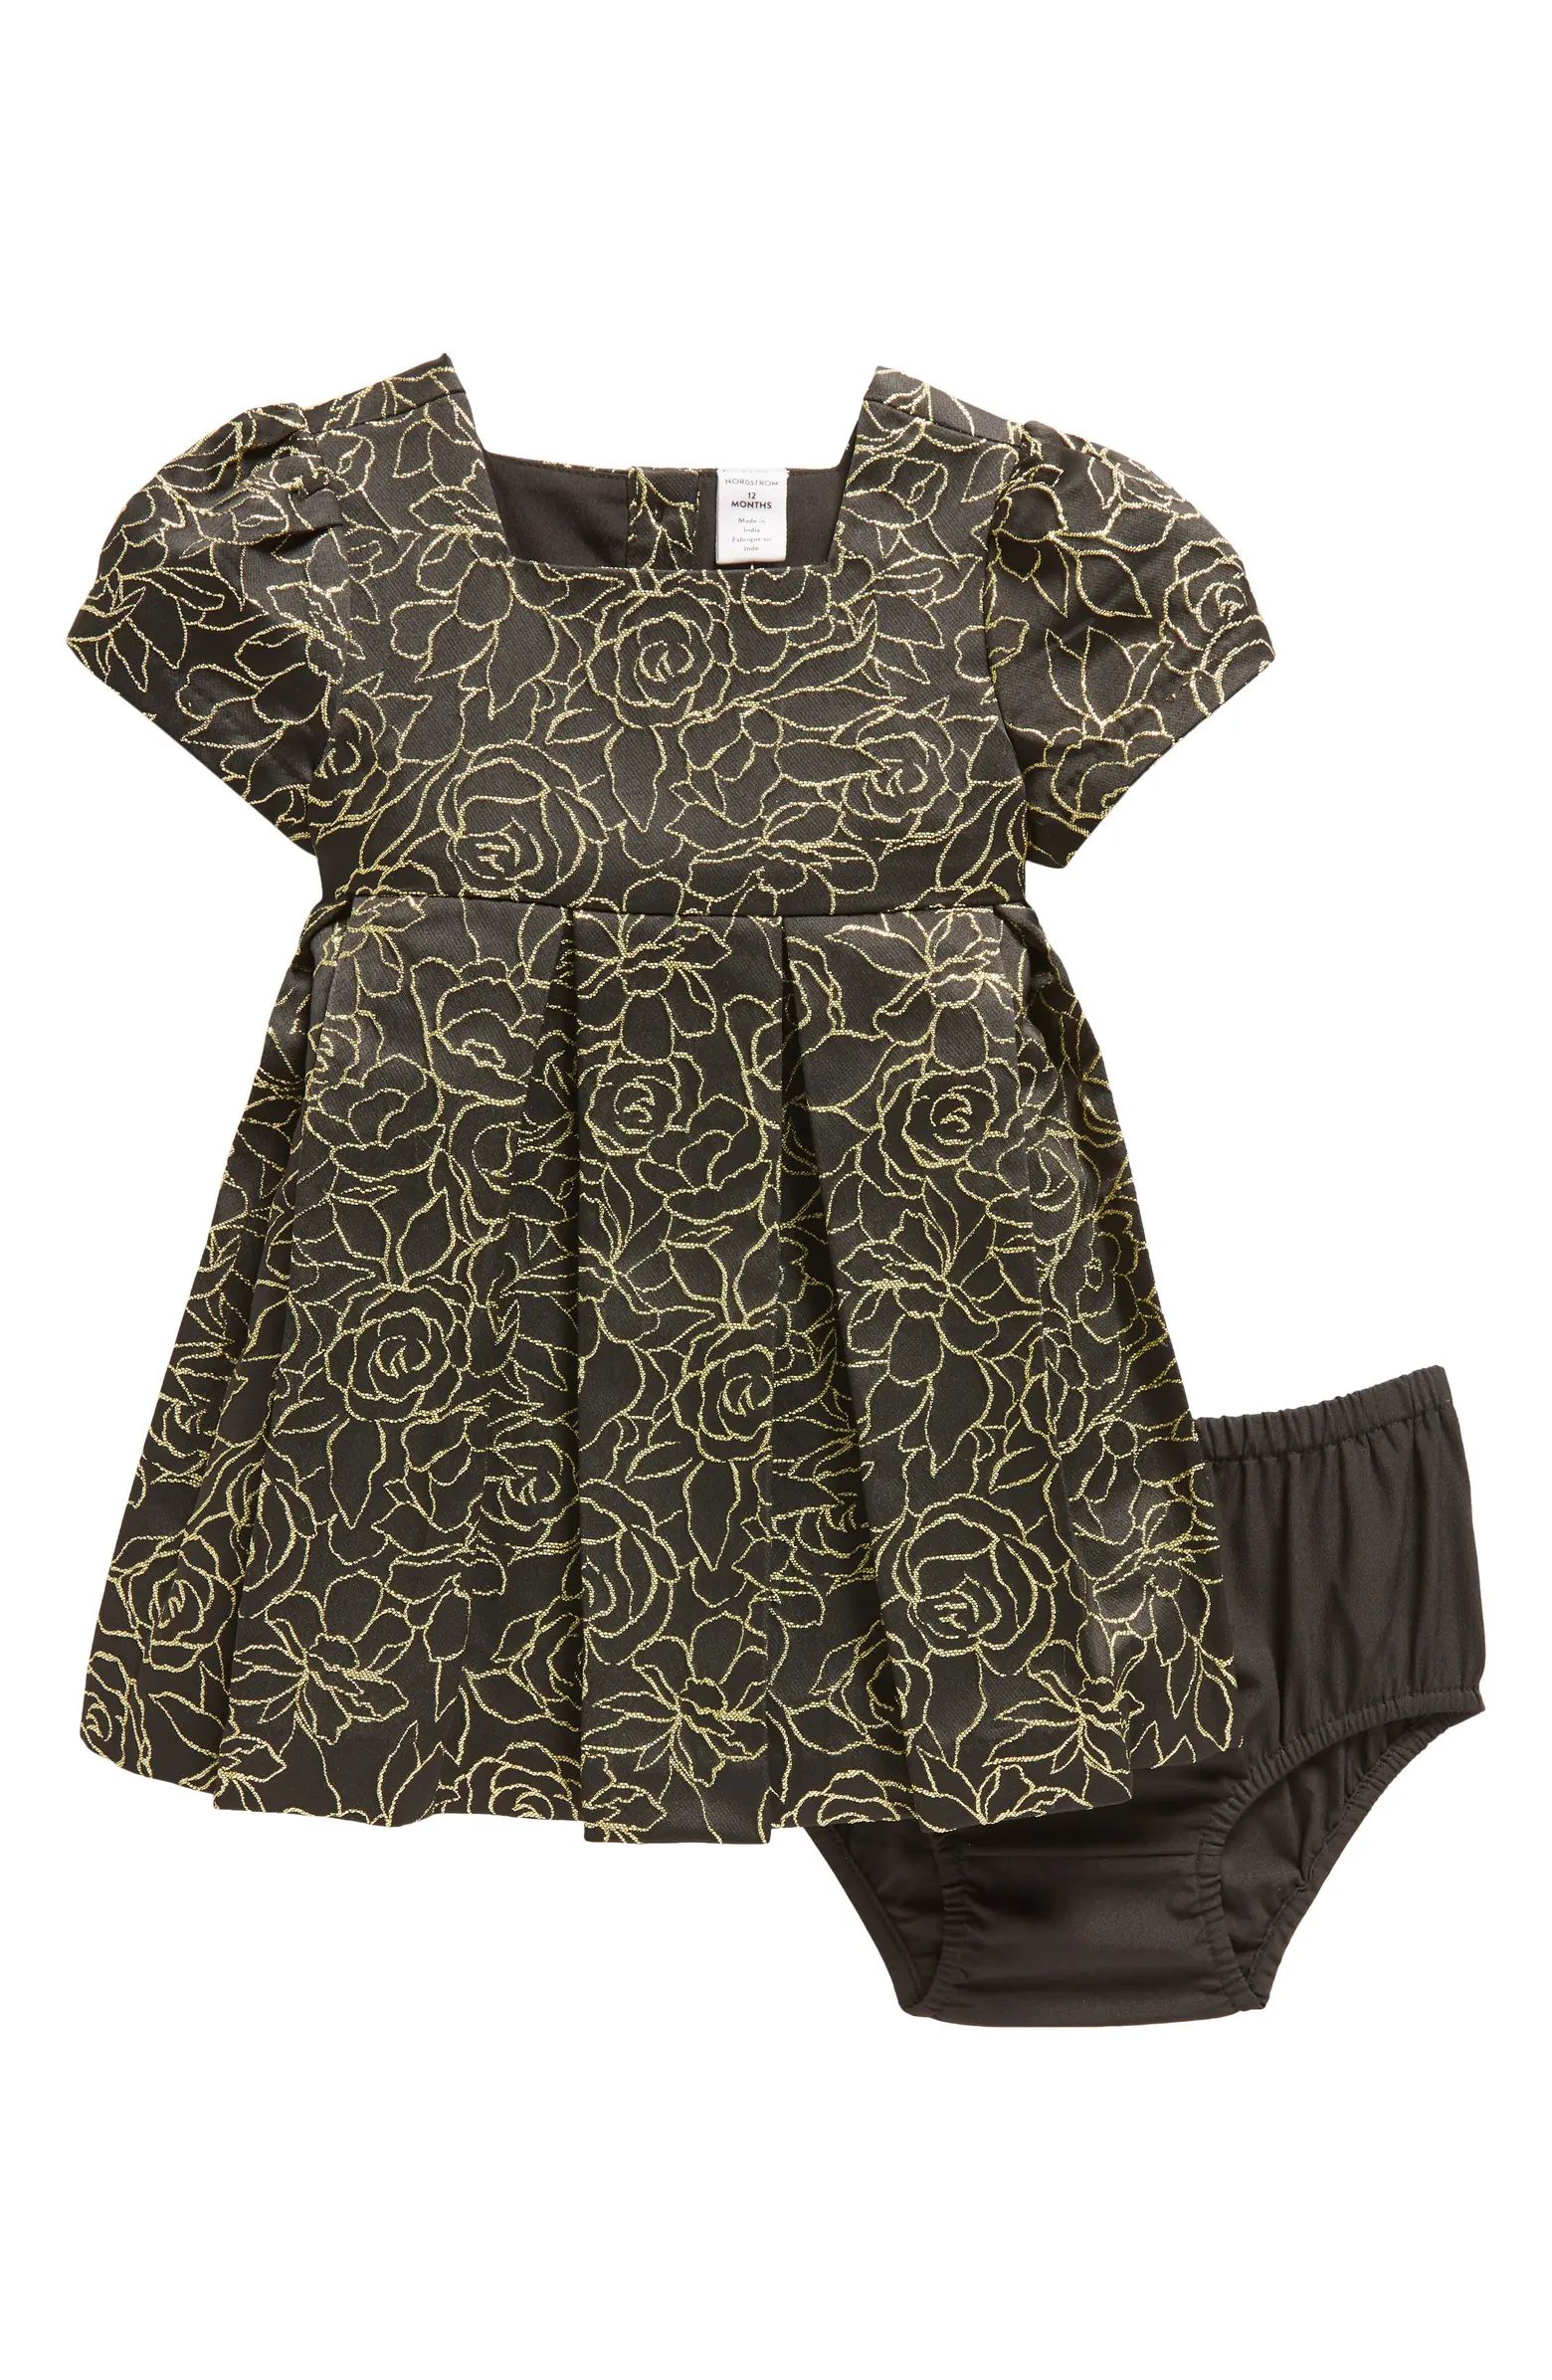 Matching Family Moments Metallic Jacquard Dress with Bloomers | Nordstrom